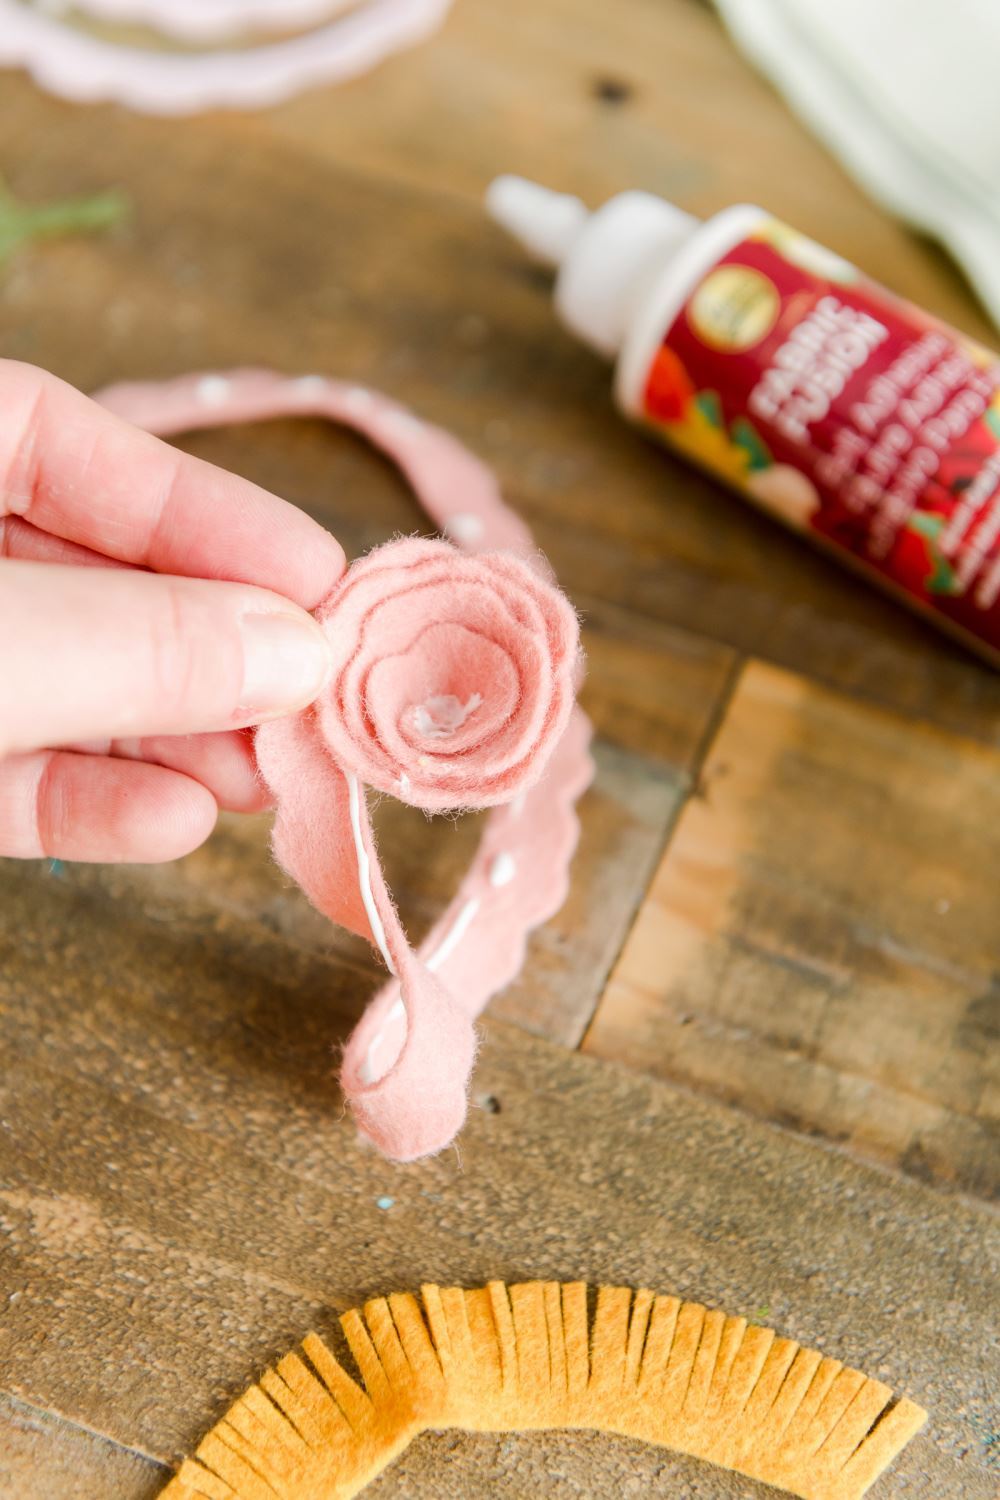 Apply fabric glue and roll to create felt flowers